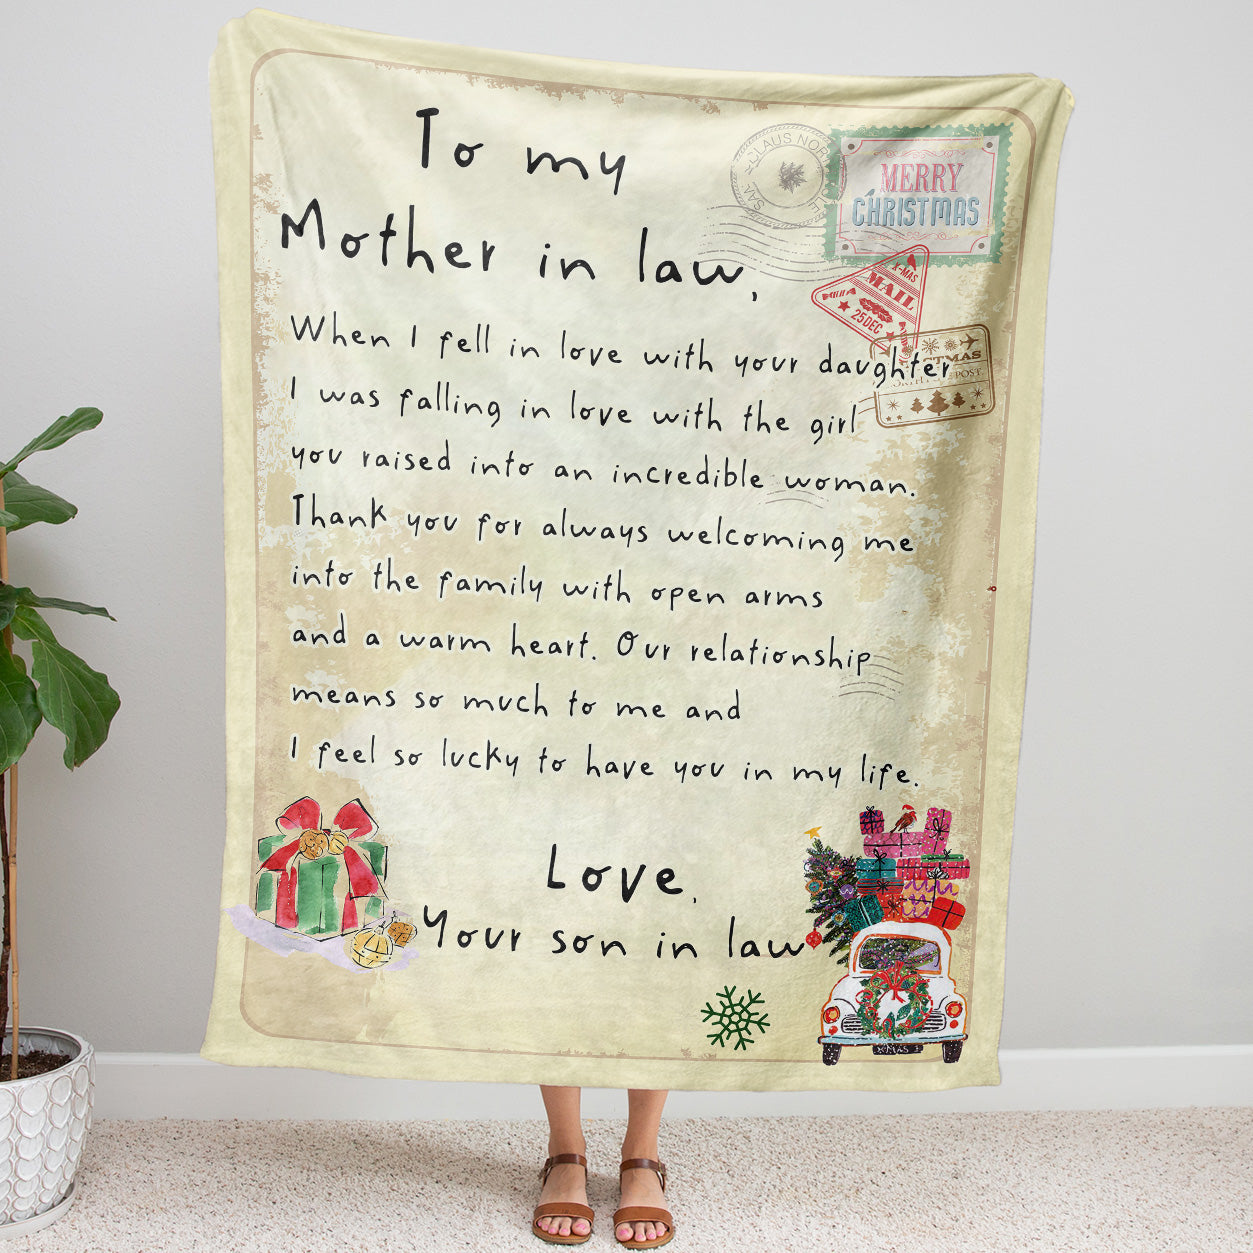 Blanket Christmas Gift ideas for Mother in Law from Son in Law Customize Personalize Love with Your Daughter 20121110 - Fleece Blanket